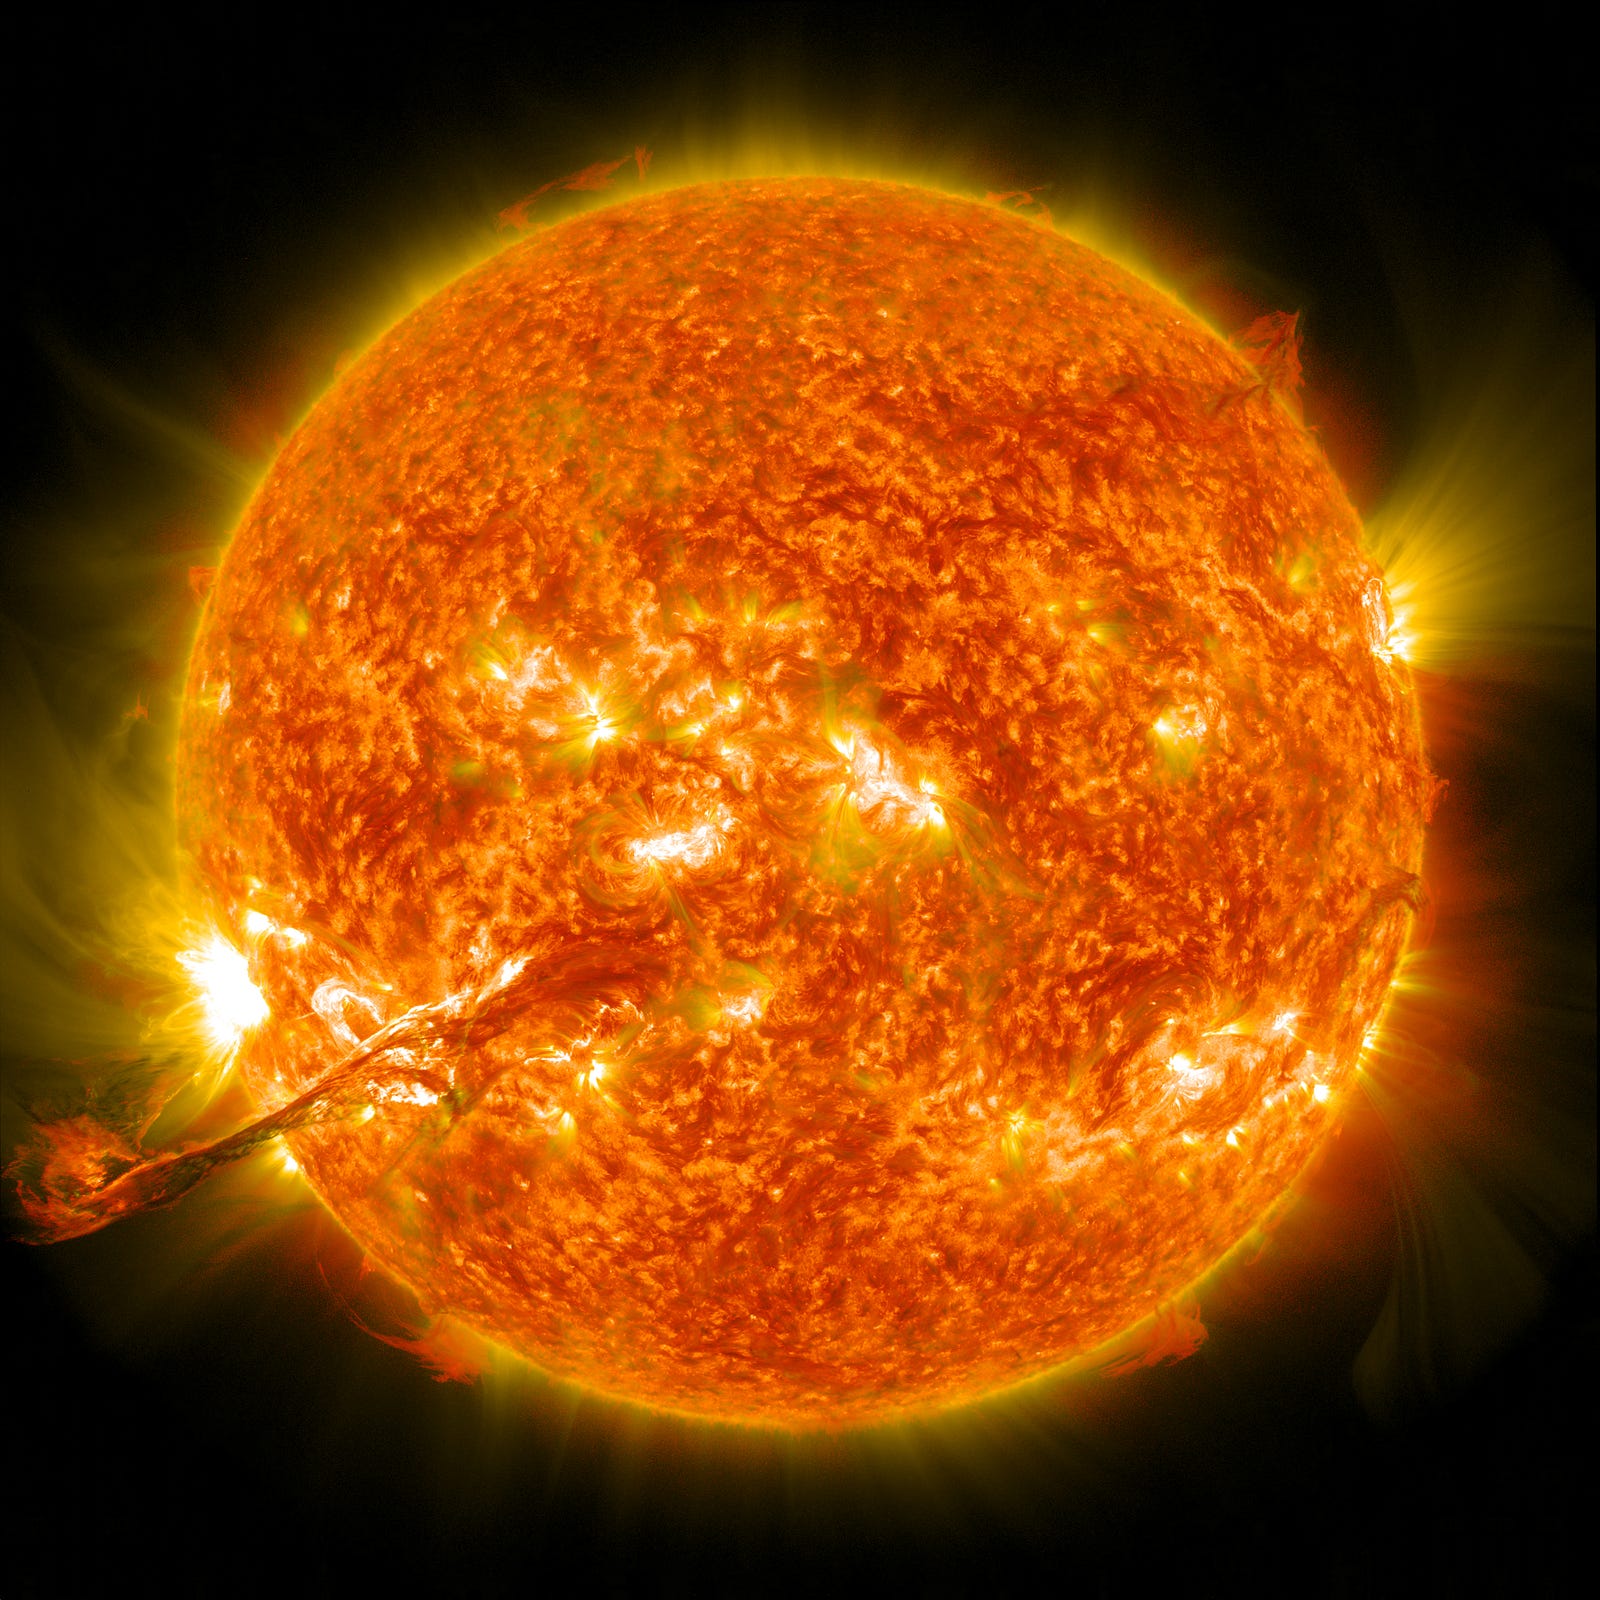 A close-up image of the blazing sun. One in five Americans will get skin cancer by age 70. Sunscreen can lower this risk and help prevent premature skin aging (age spots and wrinkles, for instance).